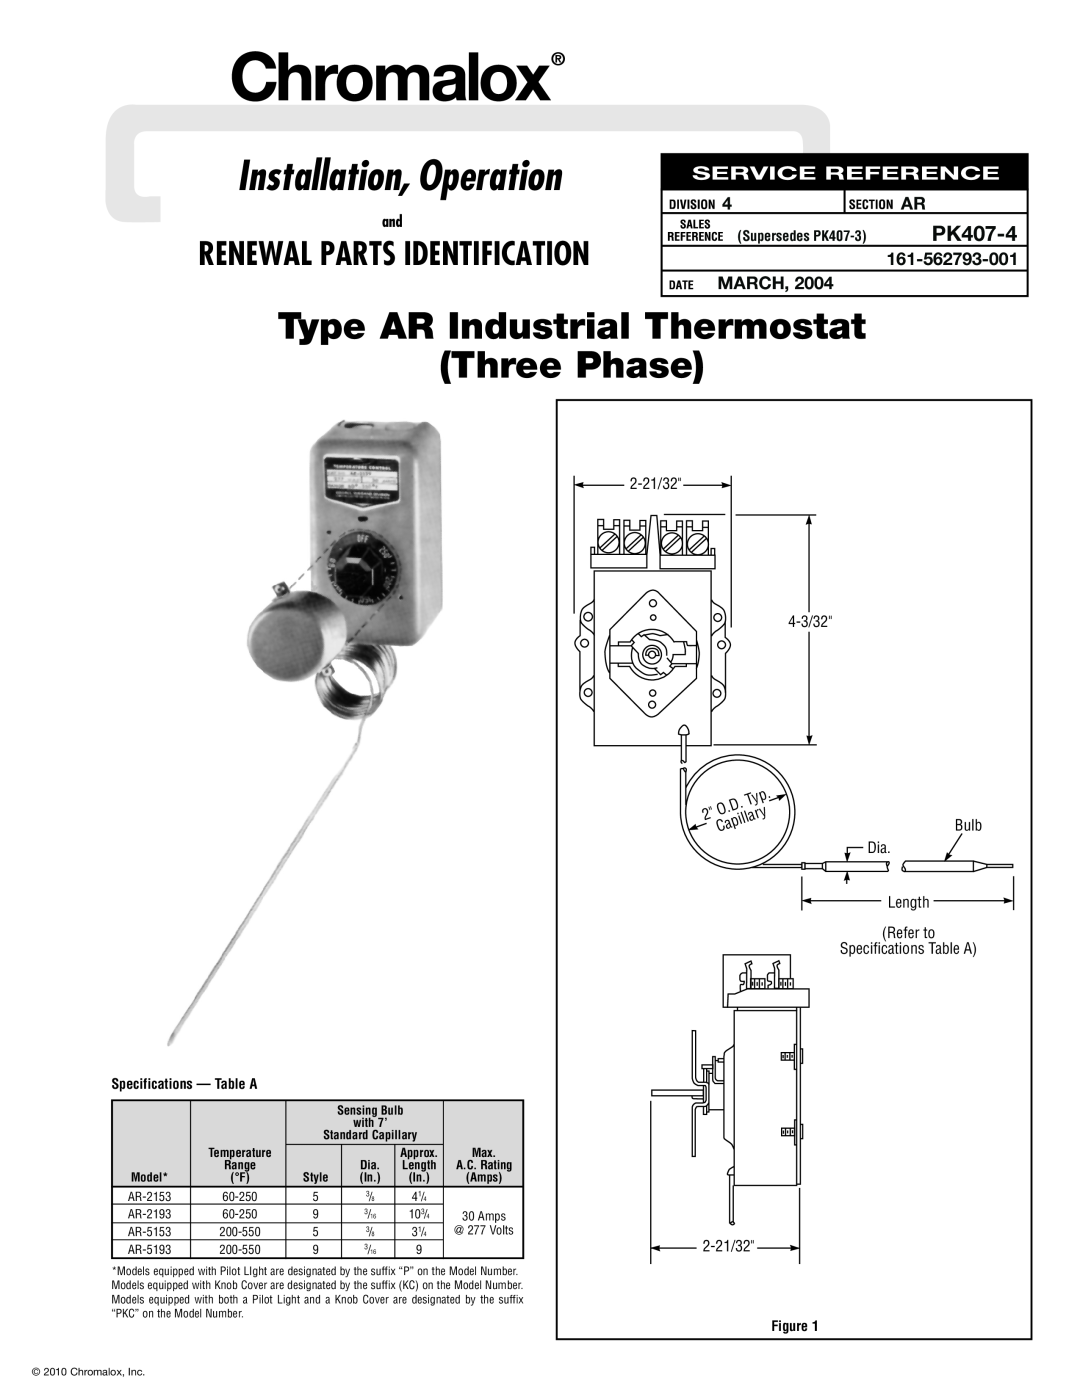 Chromalox PK407-3 specifications PK407-4, March, Installation, Operation, Type AR Industrial Thermostat Three Phase, Bulb 